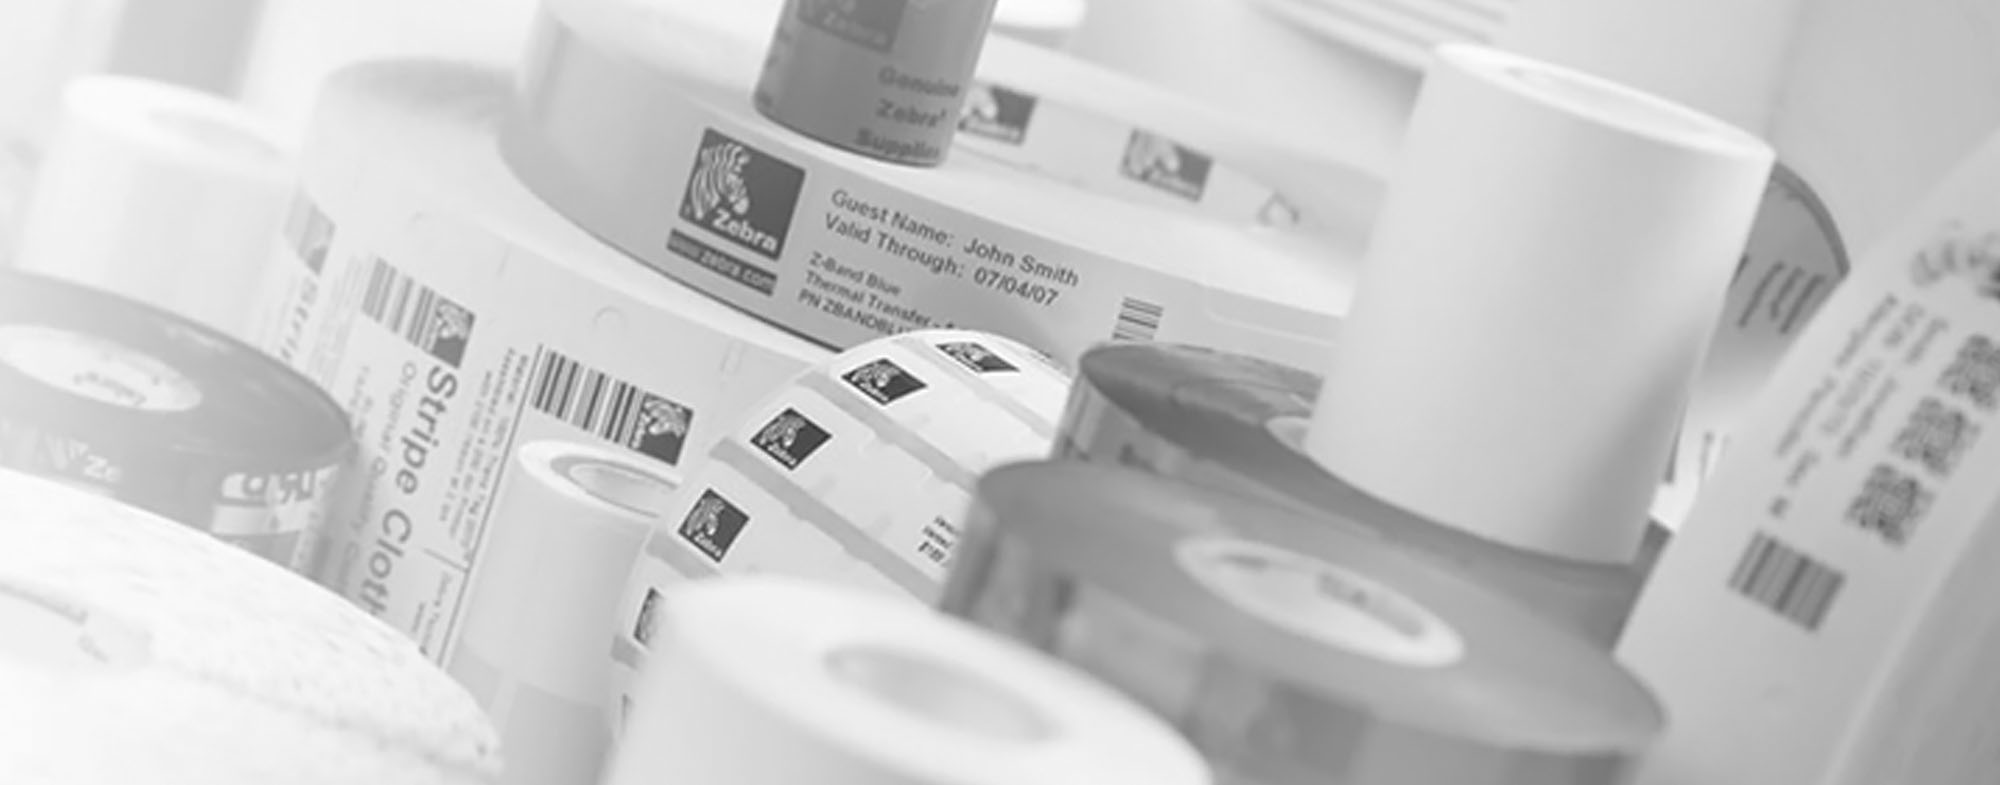 Barcode stickers & barcode labels for asset & inventory management.